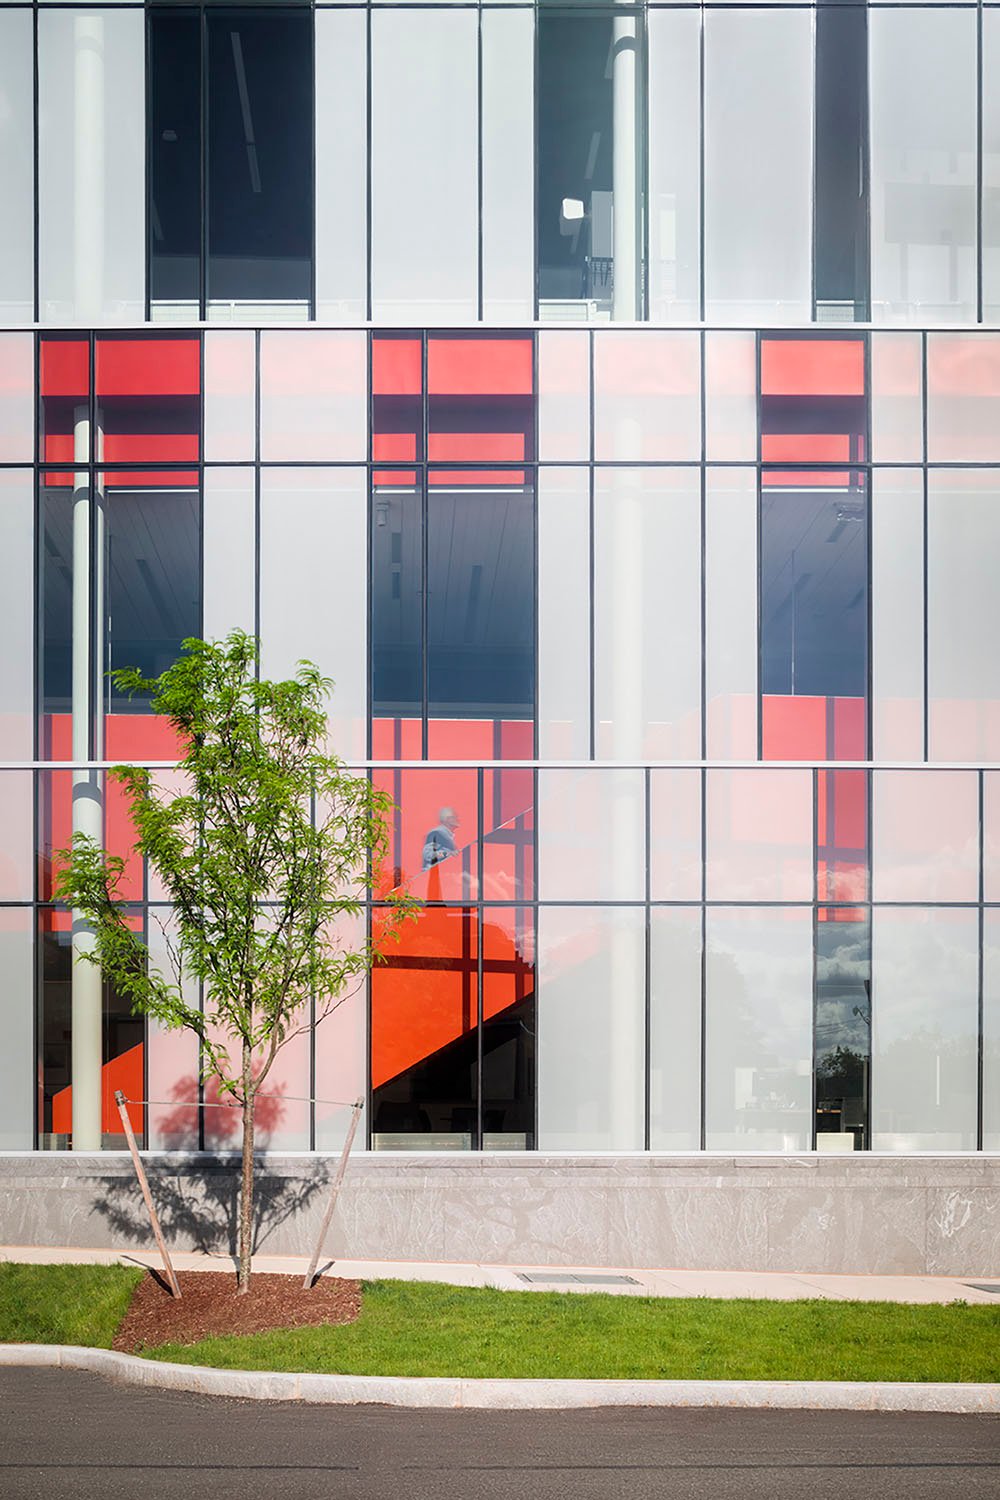 Windowwall Composed of Transparent and Solid Panels Reveal and Conceal in a Lively Pattern | Brad Feinknopf